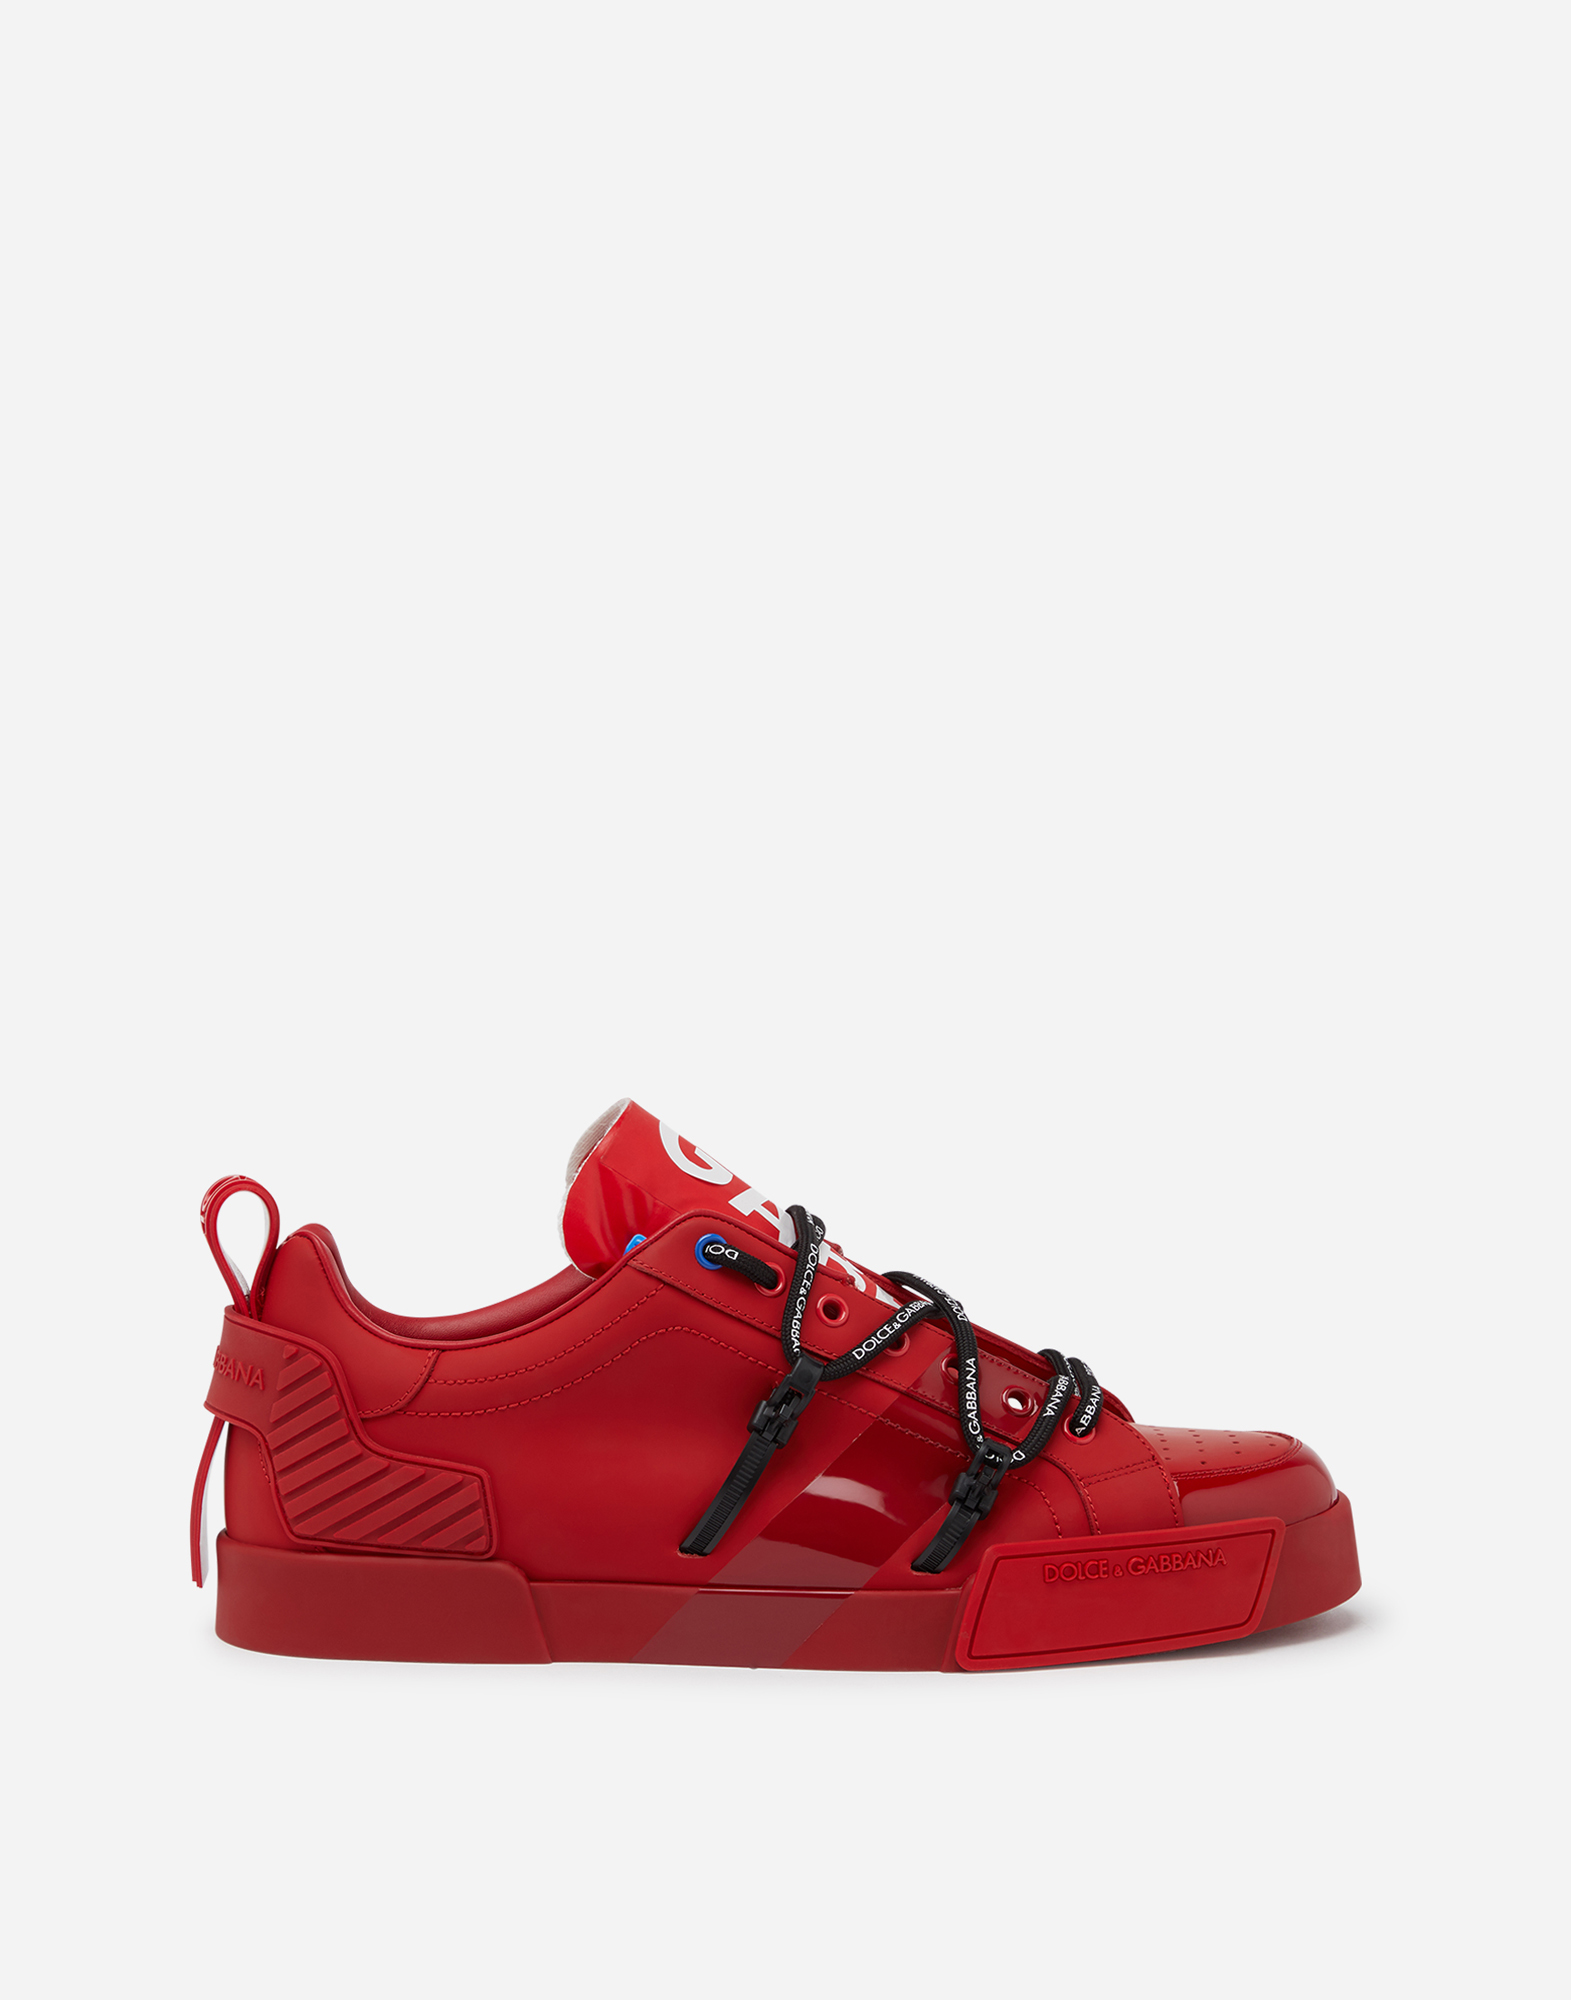 dolce gabbana sneakers red